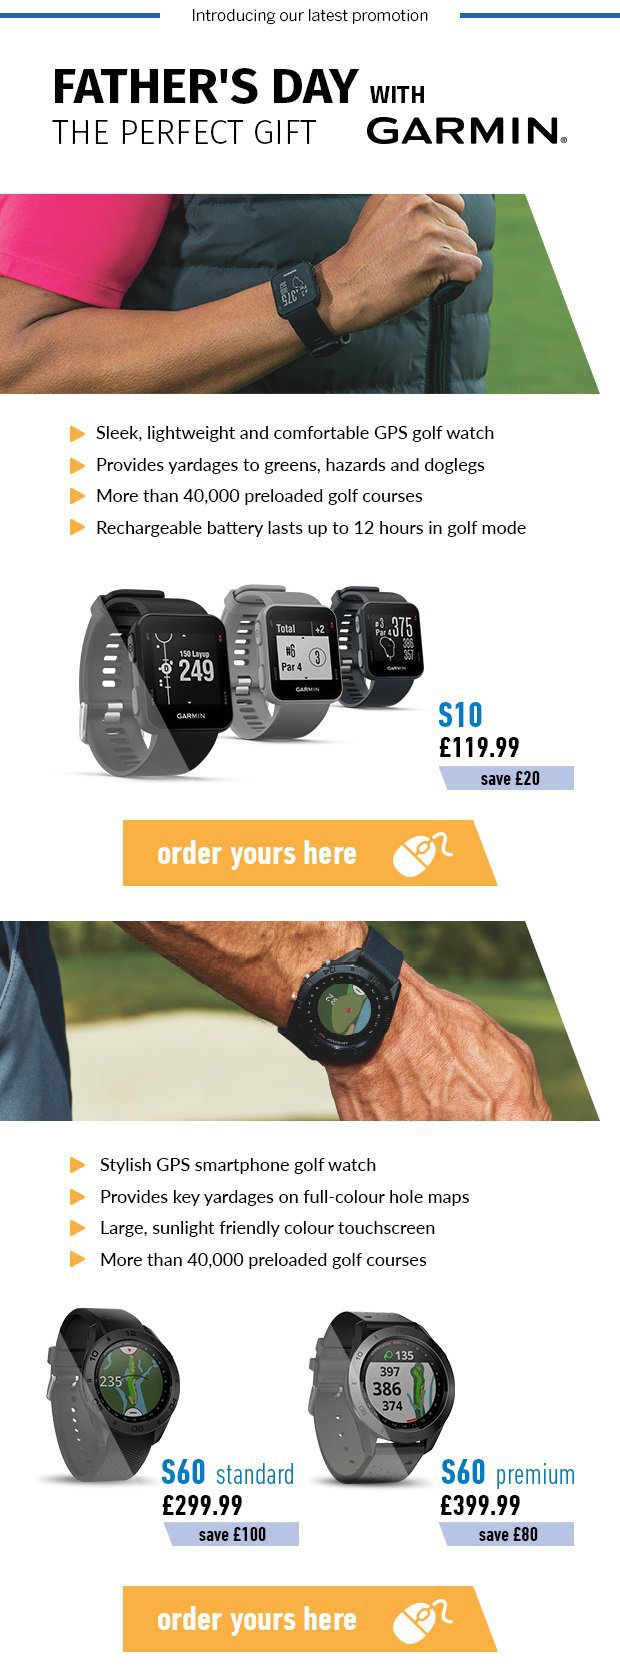 The Perfect Father's Day gift from Garmin.